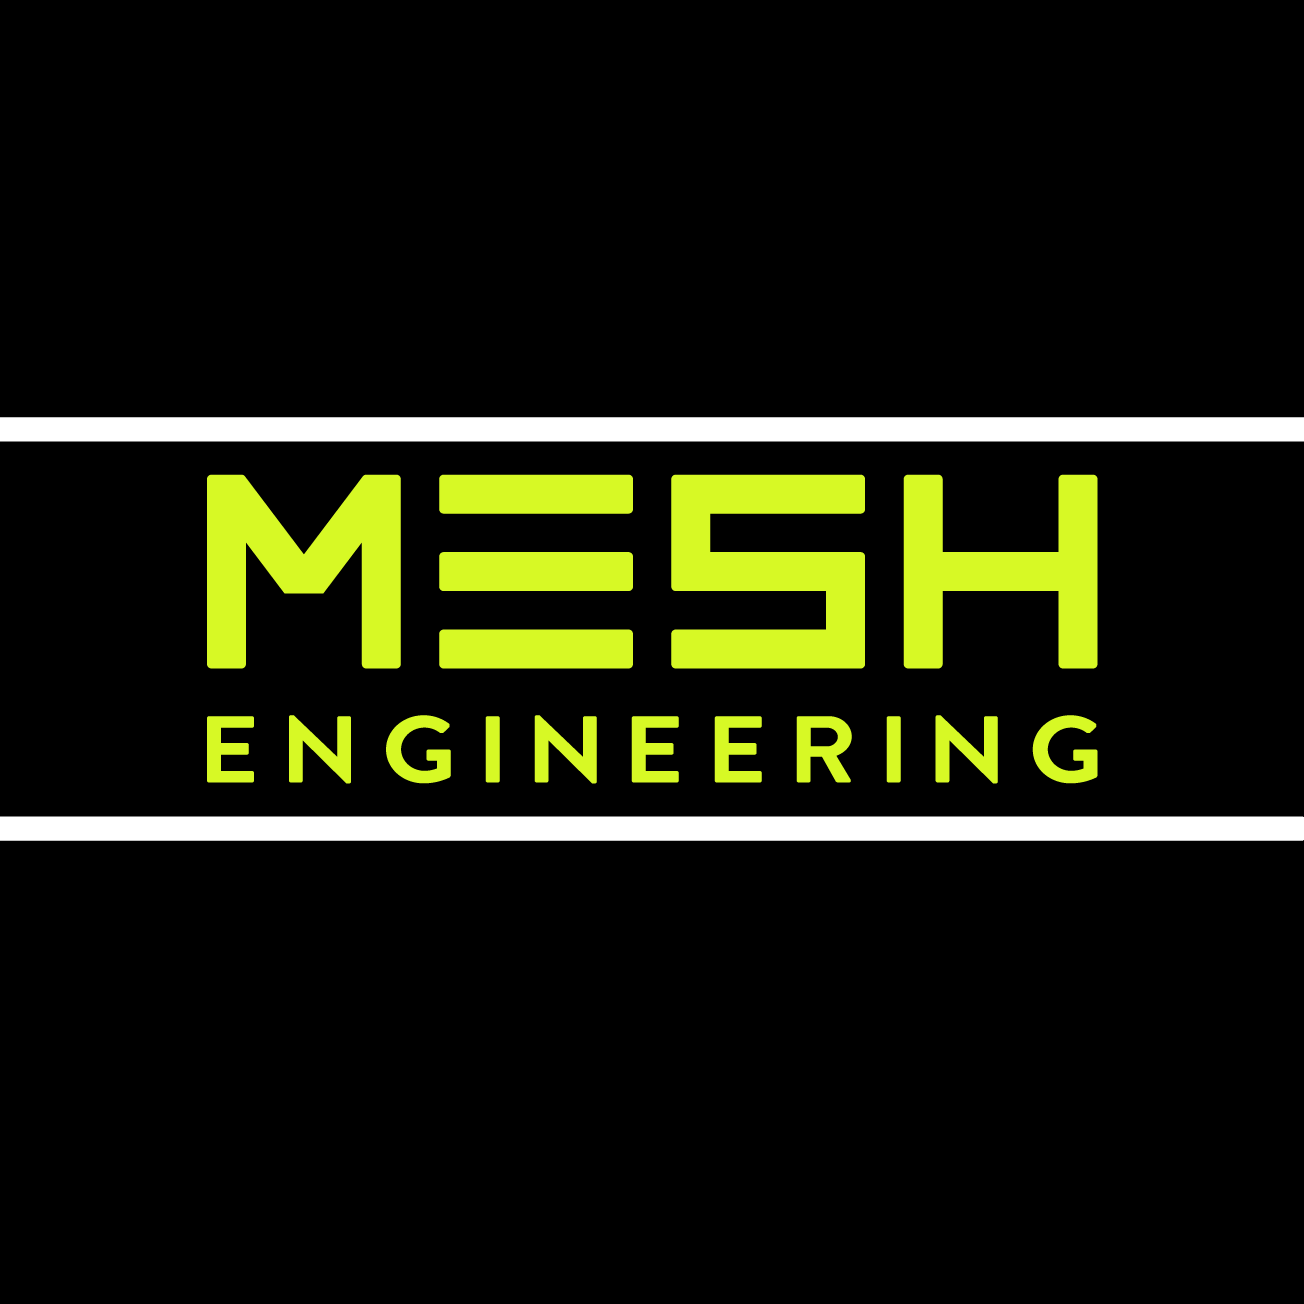 Club Image for MESH ENGINEERING